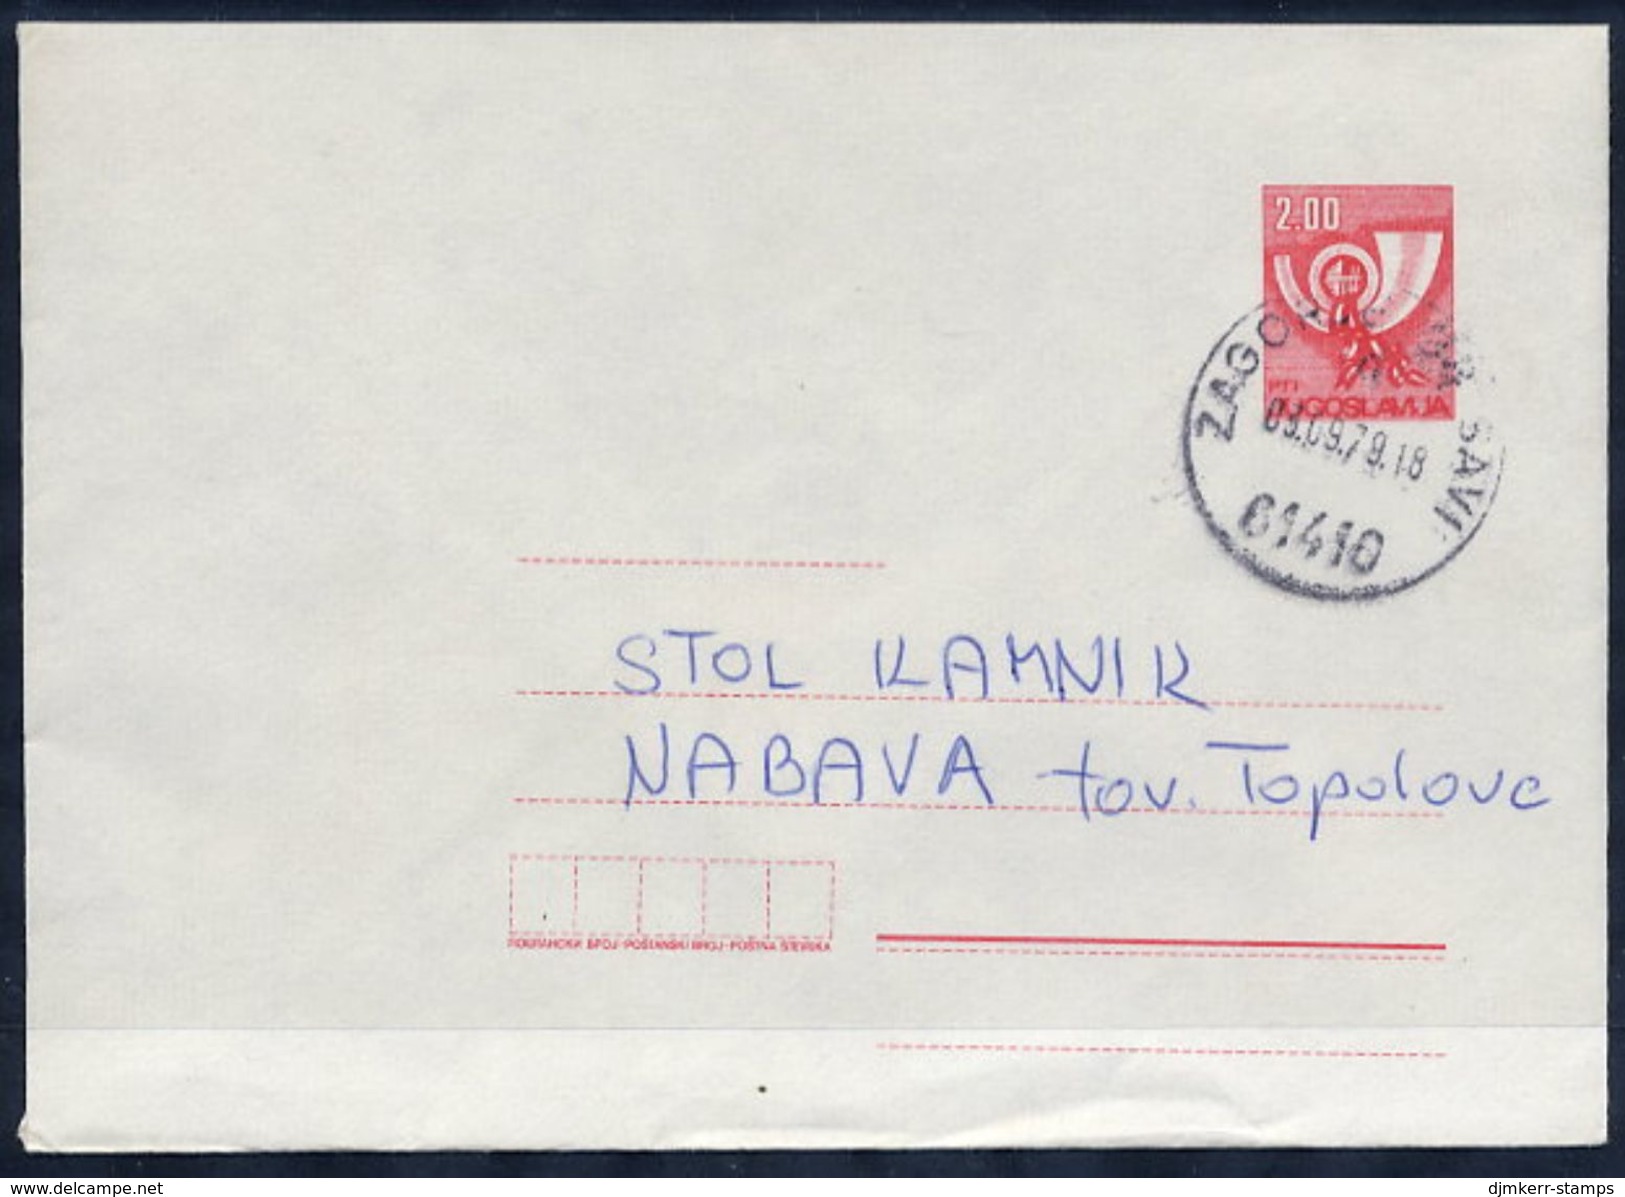 YUGOSLAVIA 1978 Posthorn 2 D.stationery Envelope Used Without Additional Franking.  Michel U71 - Entiers Postaux